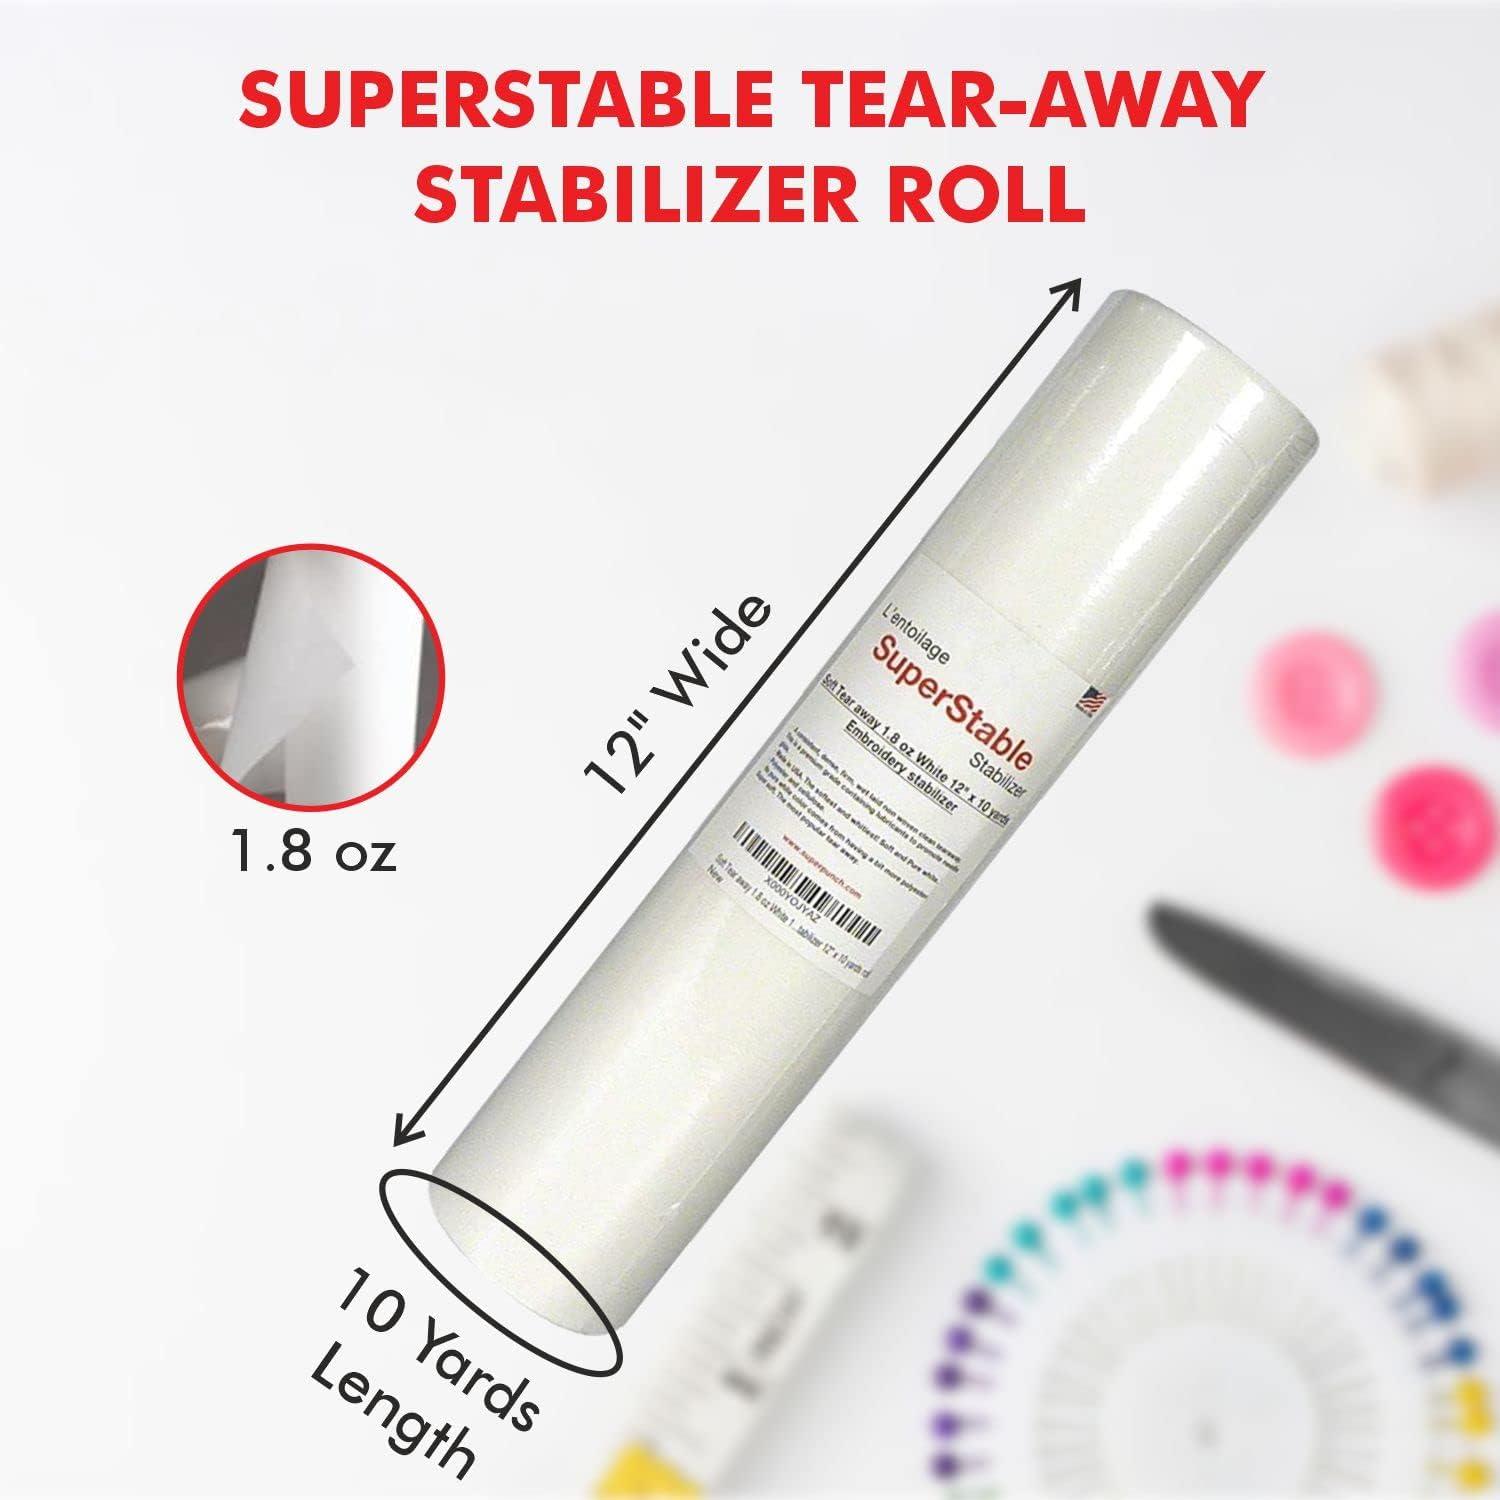 Superpunch 2.5 oz White Tear Away Stabilizer for Caps - 500 Precut Sheets  4x7 Inch, SuperStable Tearaway Machine Embroidery Stabilizer for Commercial